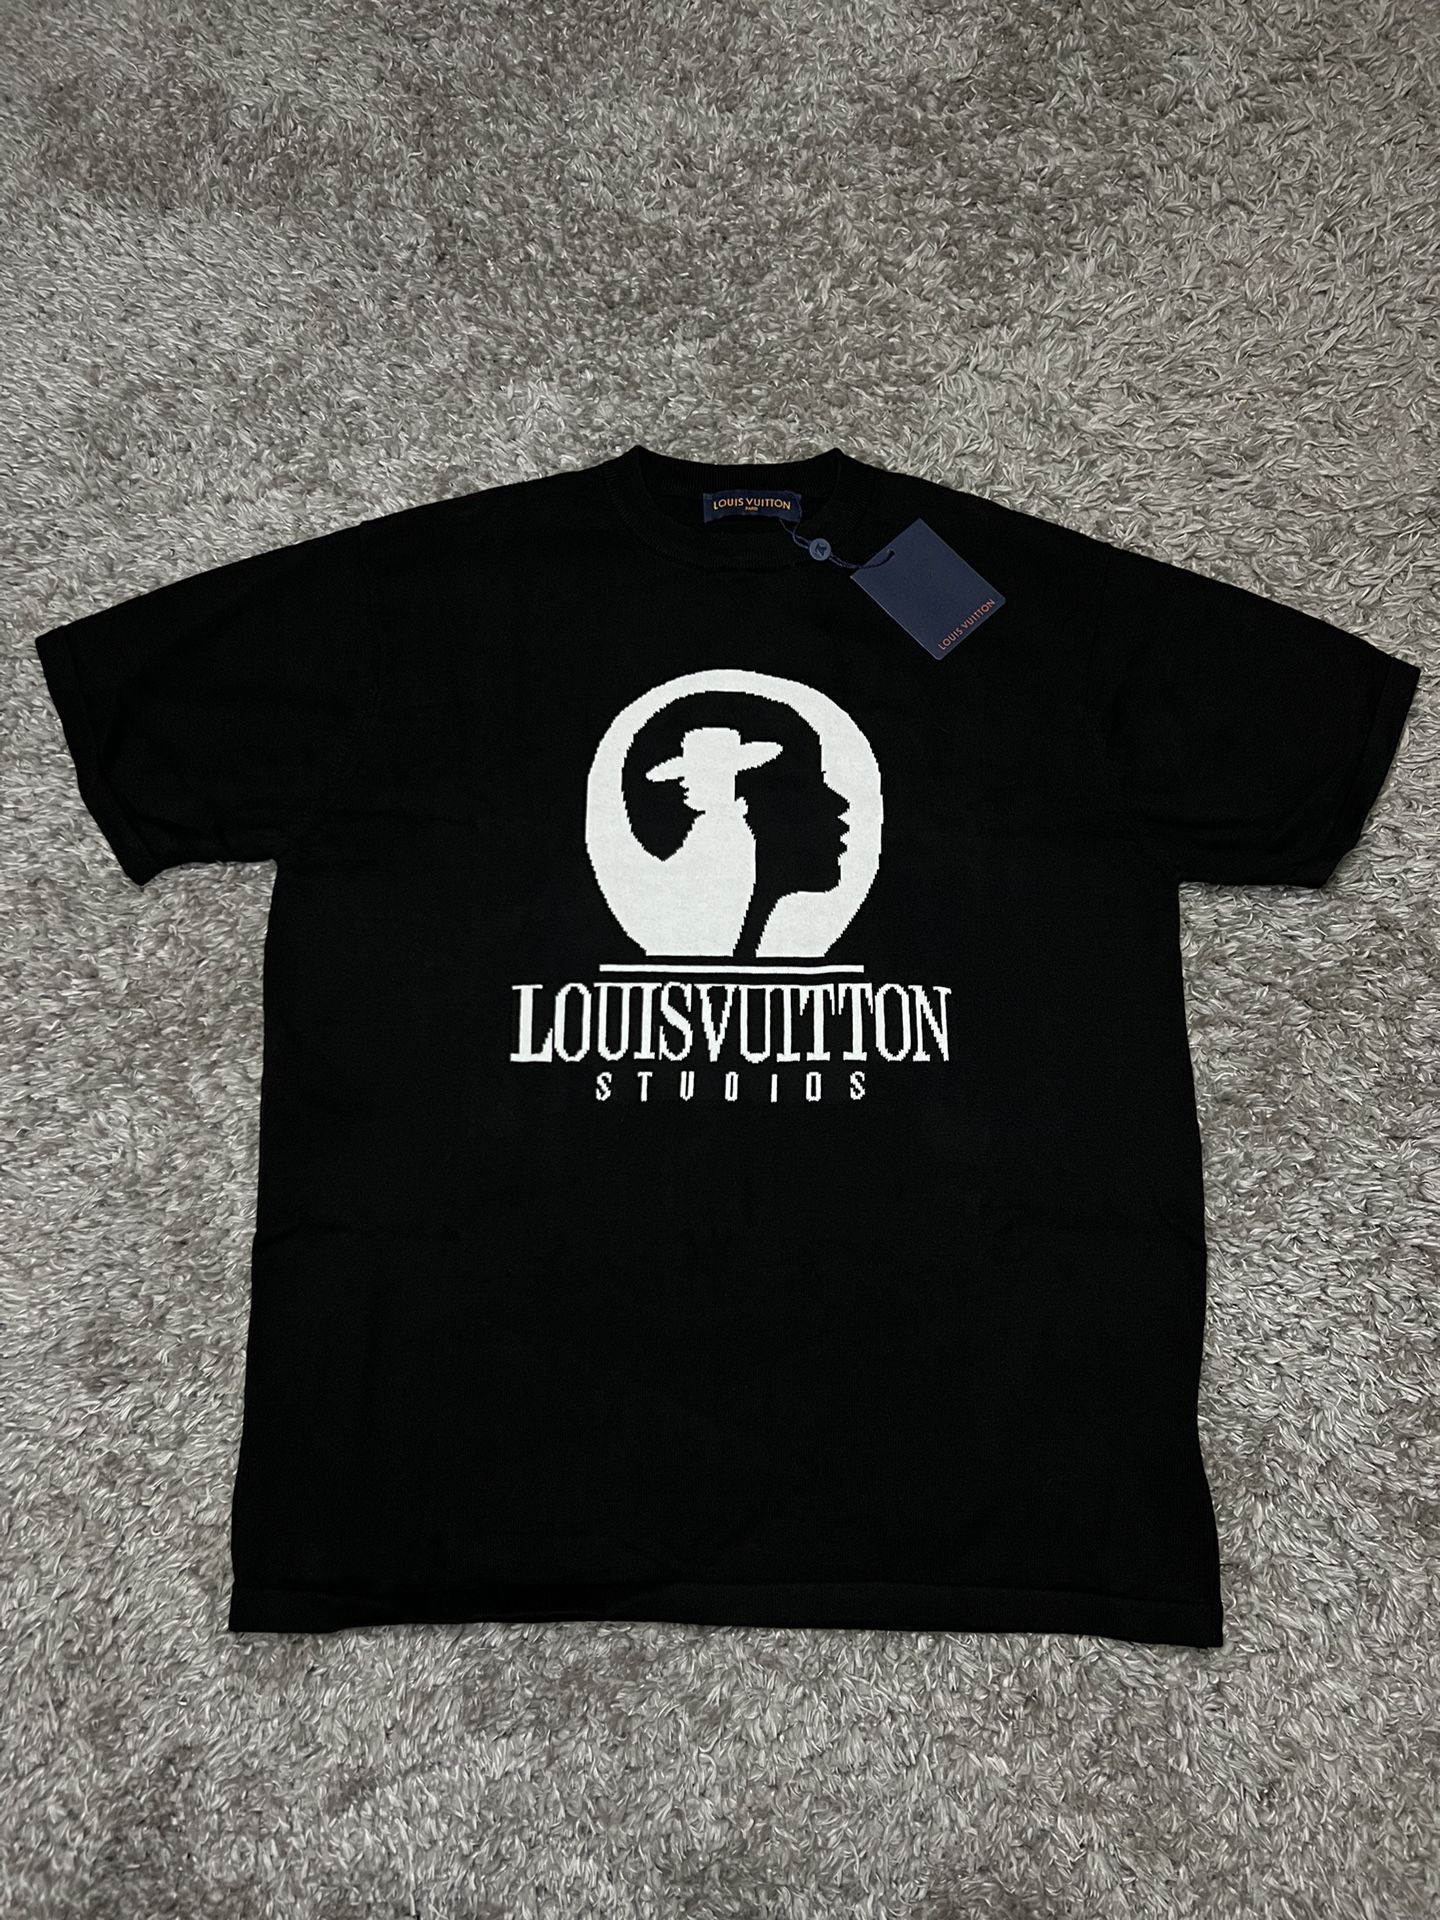 louis vuitton tshirt size small and medium 